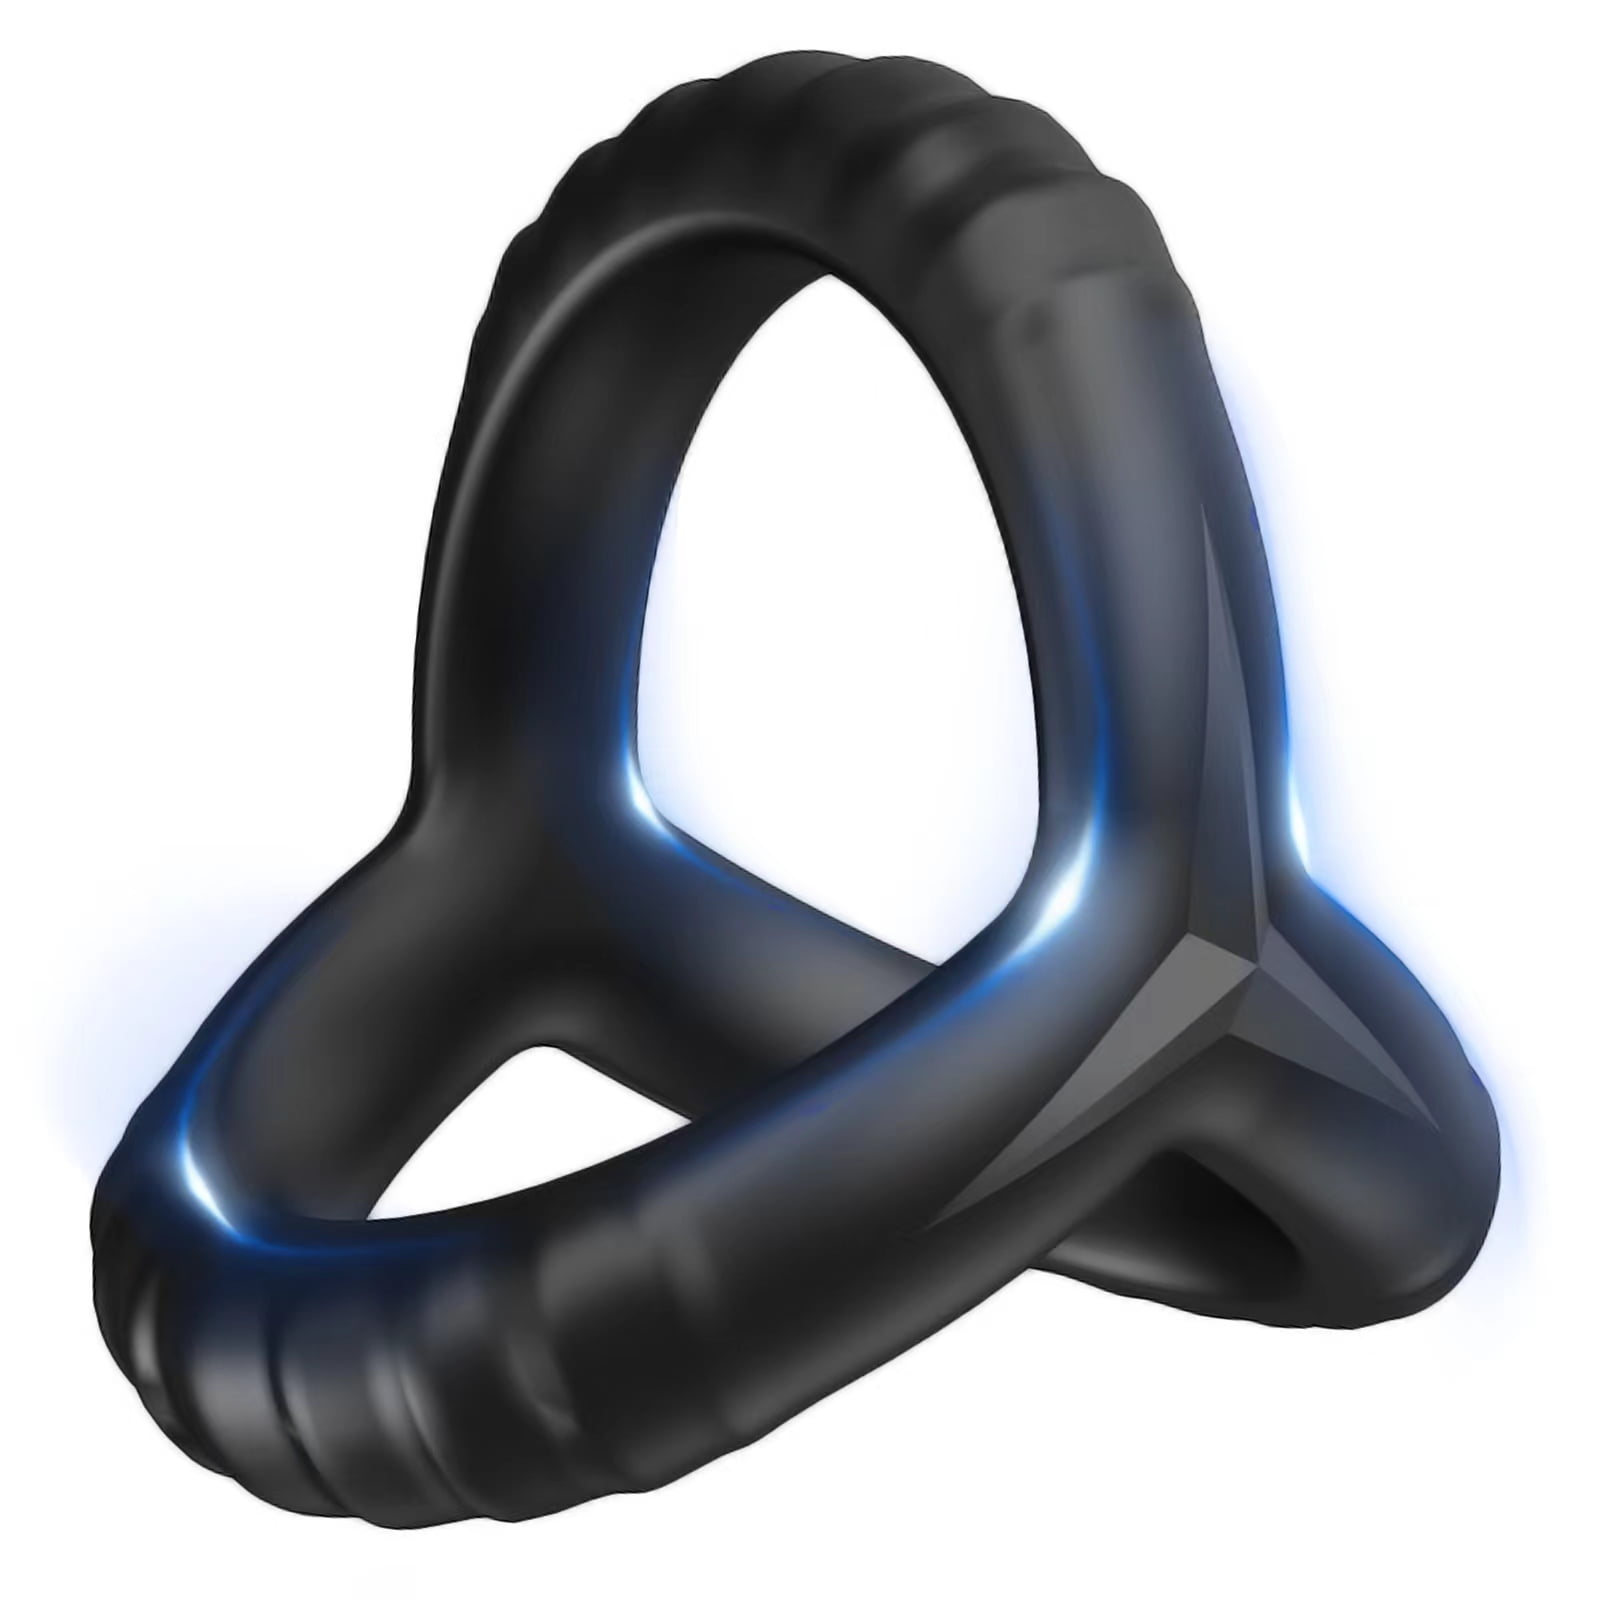 Reusable Silicone Penis Ring for Men 3 in 1 Ultra Soft Stretchy Cock Ring  Penis Enlargement